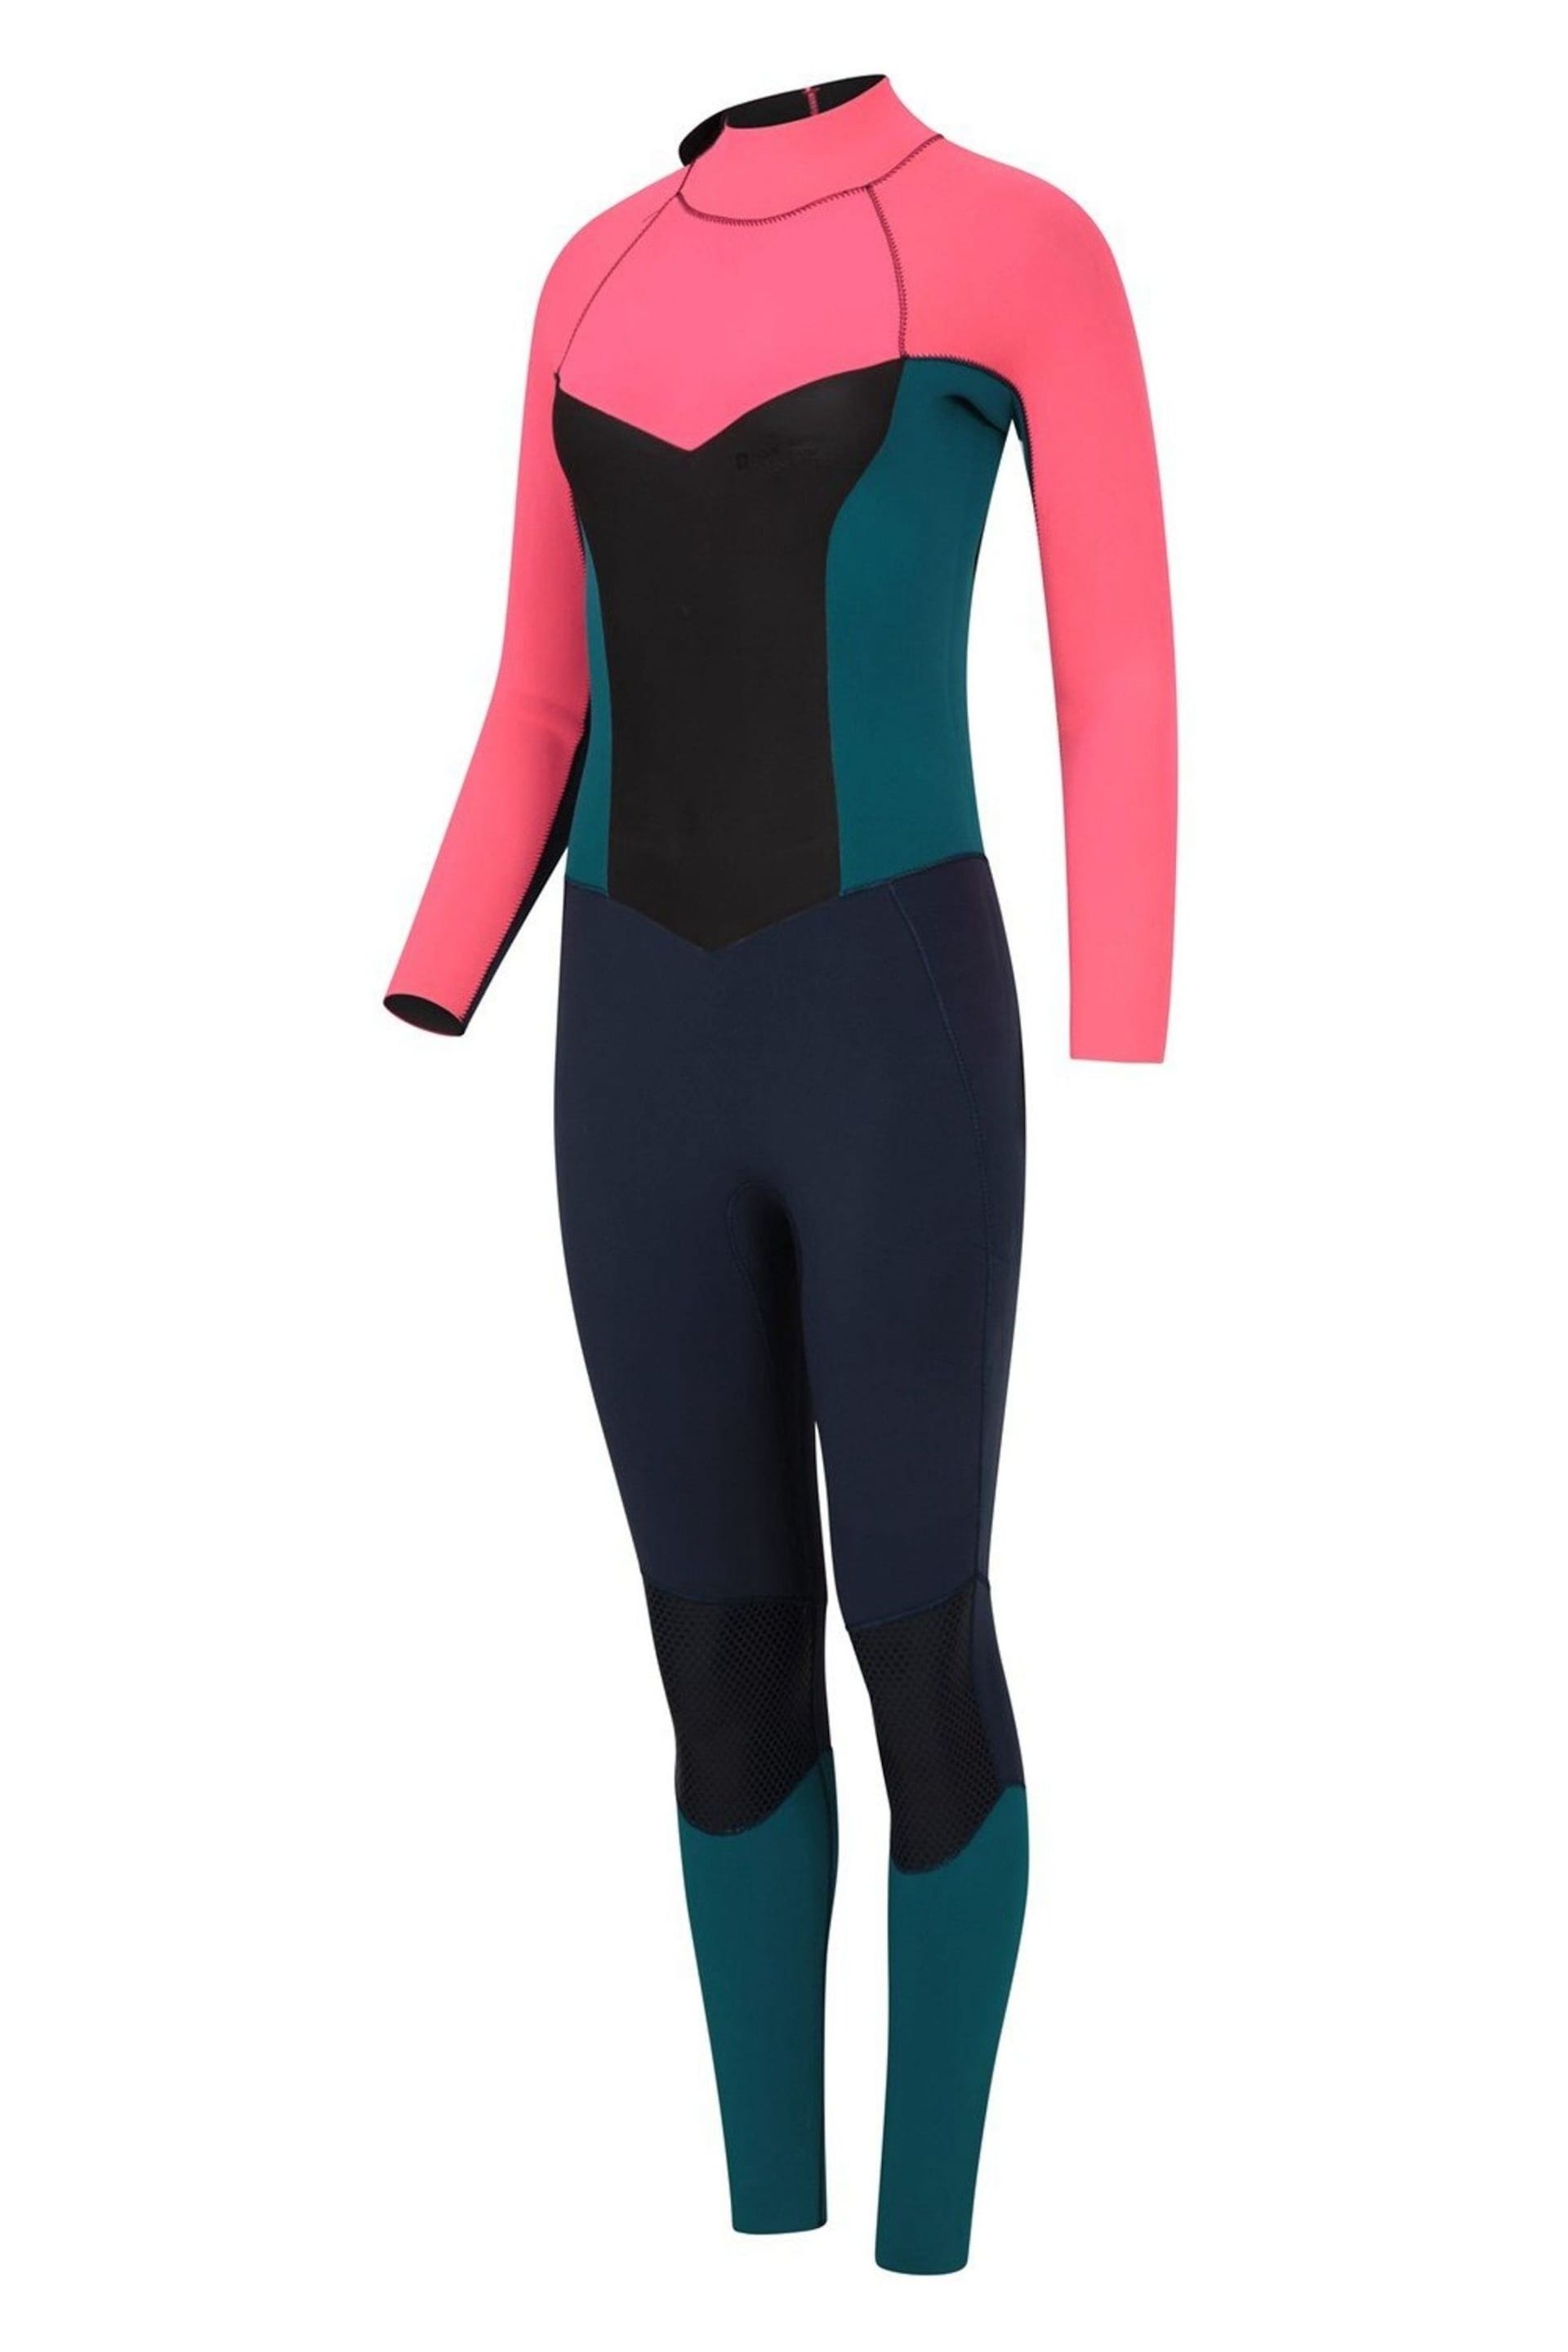 Mountain Warehouse Navy Submerge Womens Full Length 5mm Wetsuit - Image 3 of 4